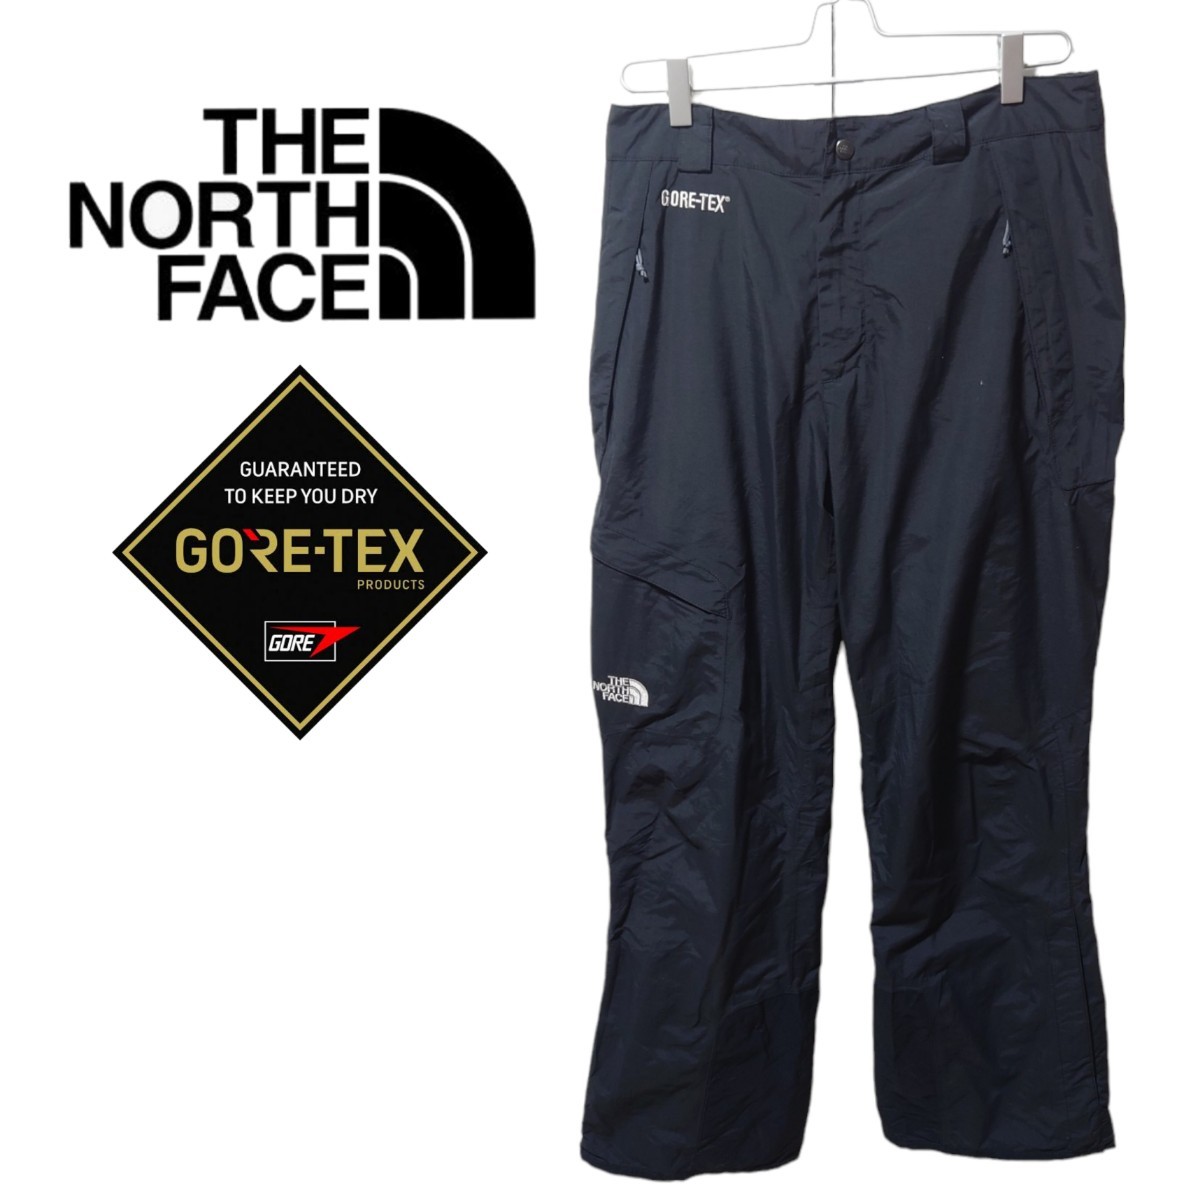 【THE NORTH FACE】GORE-TEX スキースノボーパンツA1591